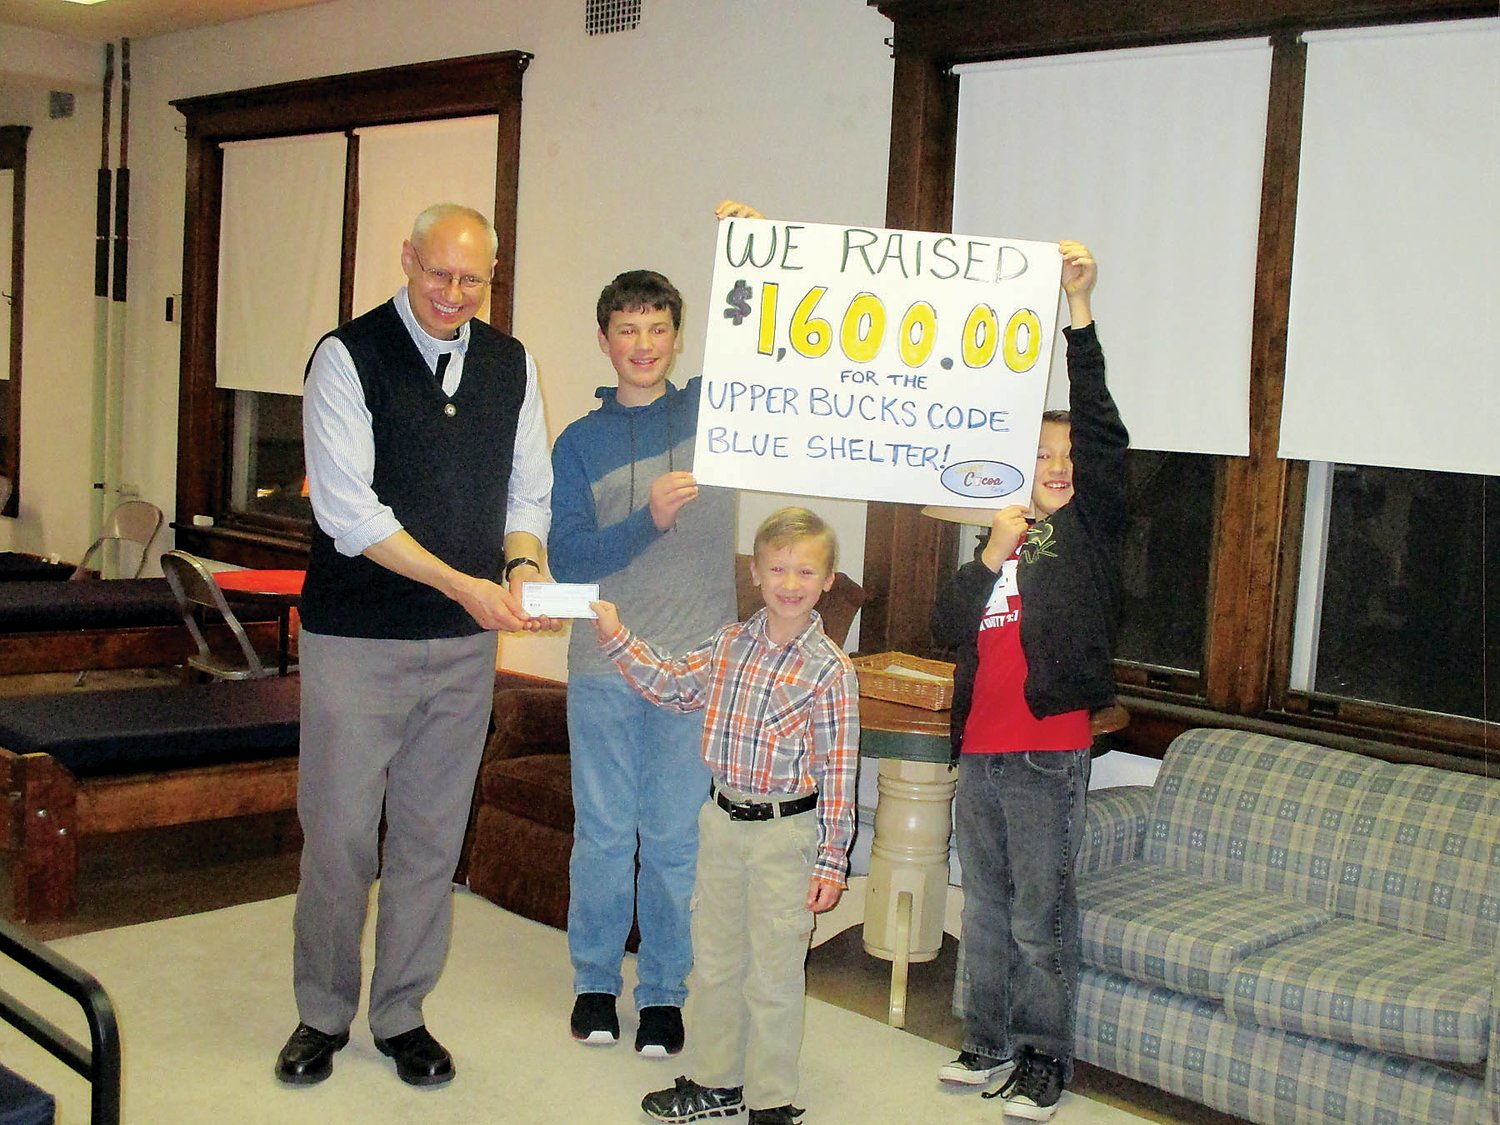 Eight-year-old Caleb Byelich presents the proceeds of his cocoa stand to David Heckler of the Upper Bucks Code Blue Homeless Shelter. Caleb’s brothers, Cameron, 15, and Jaiden, 12, helped him present the check.